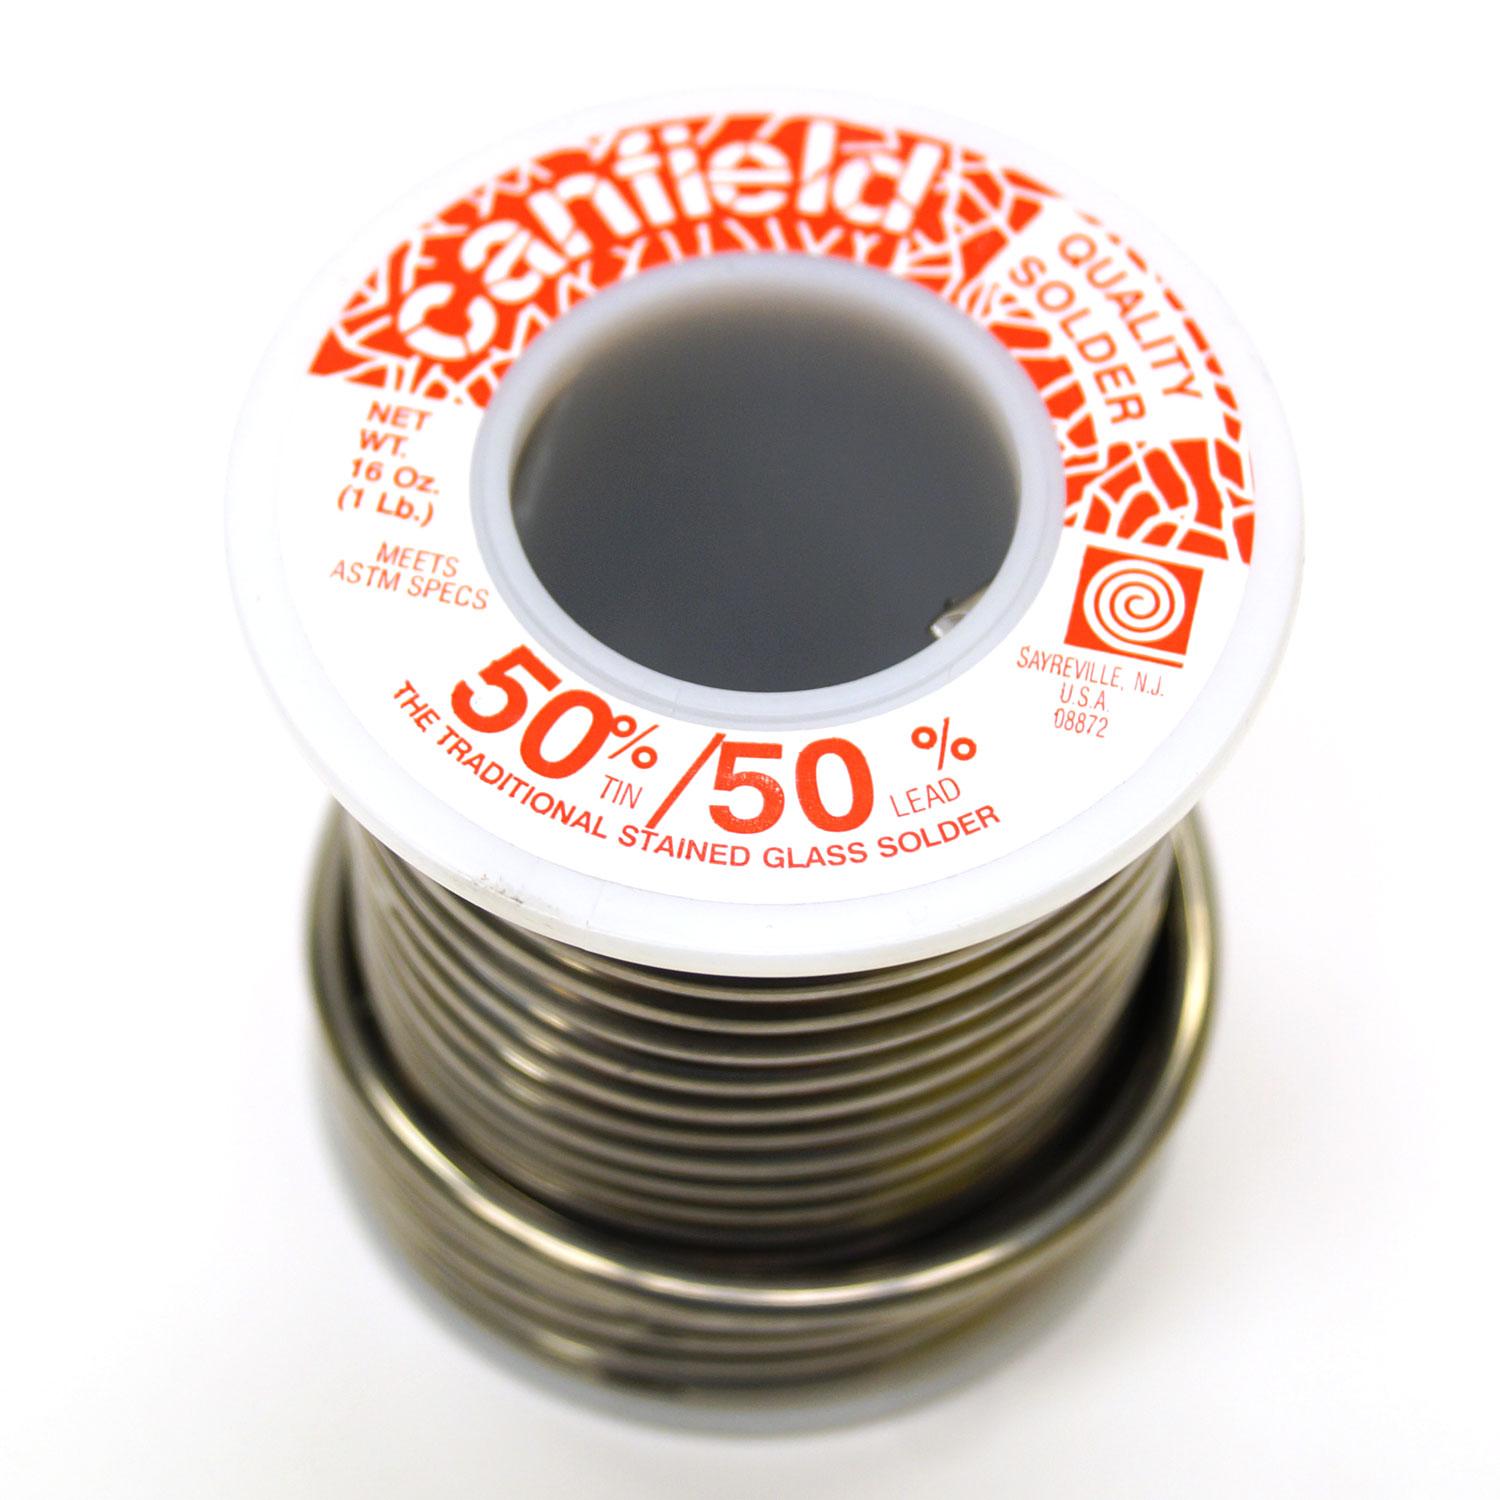 Canfield 50/50 Lead Solder for Stained Glass 1 lb Roll